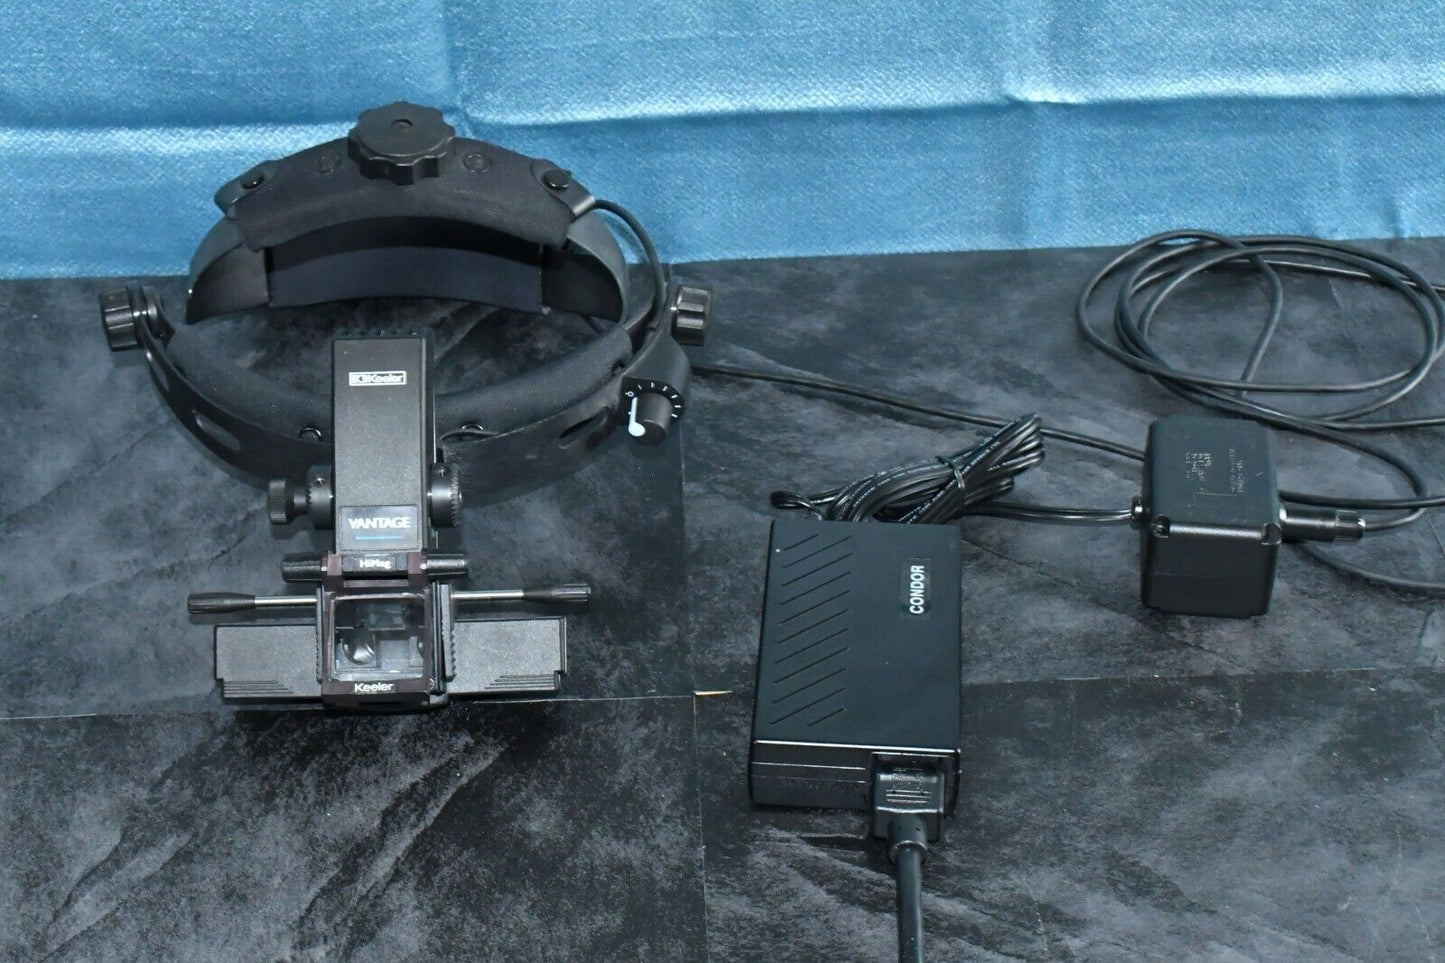 Keeler Vantage with outlet power supply